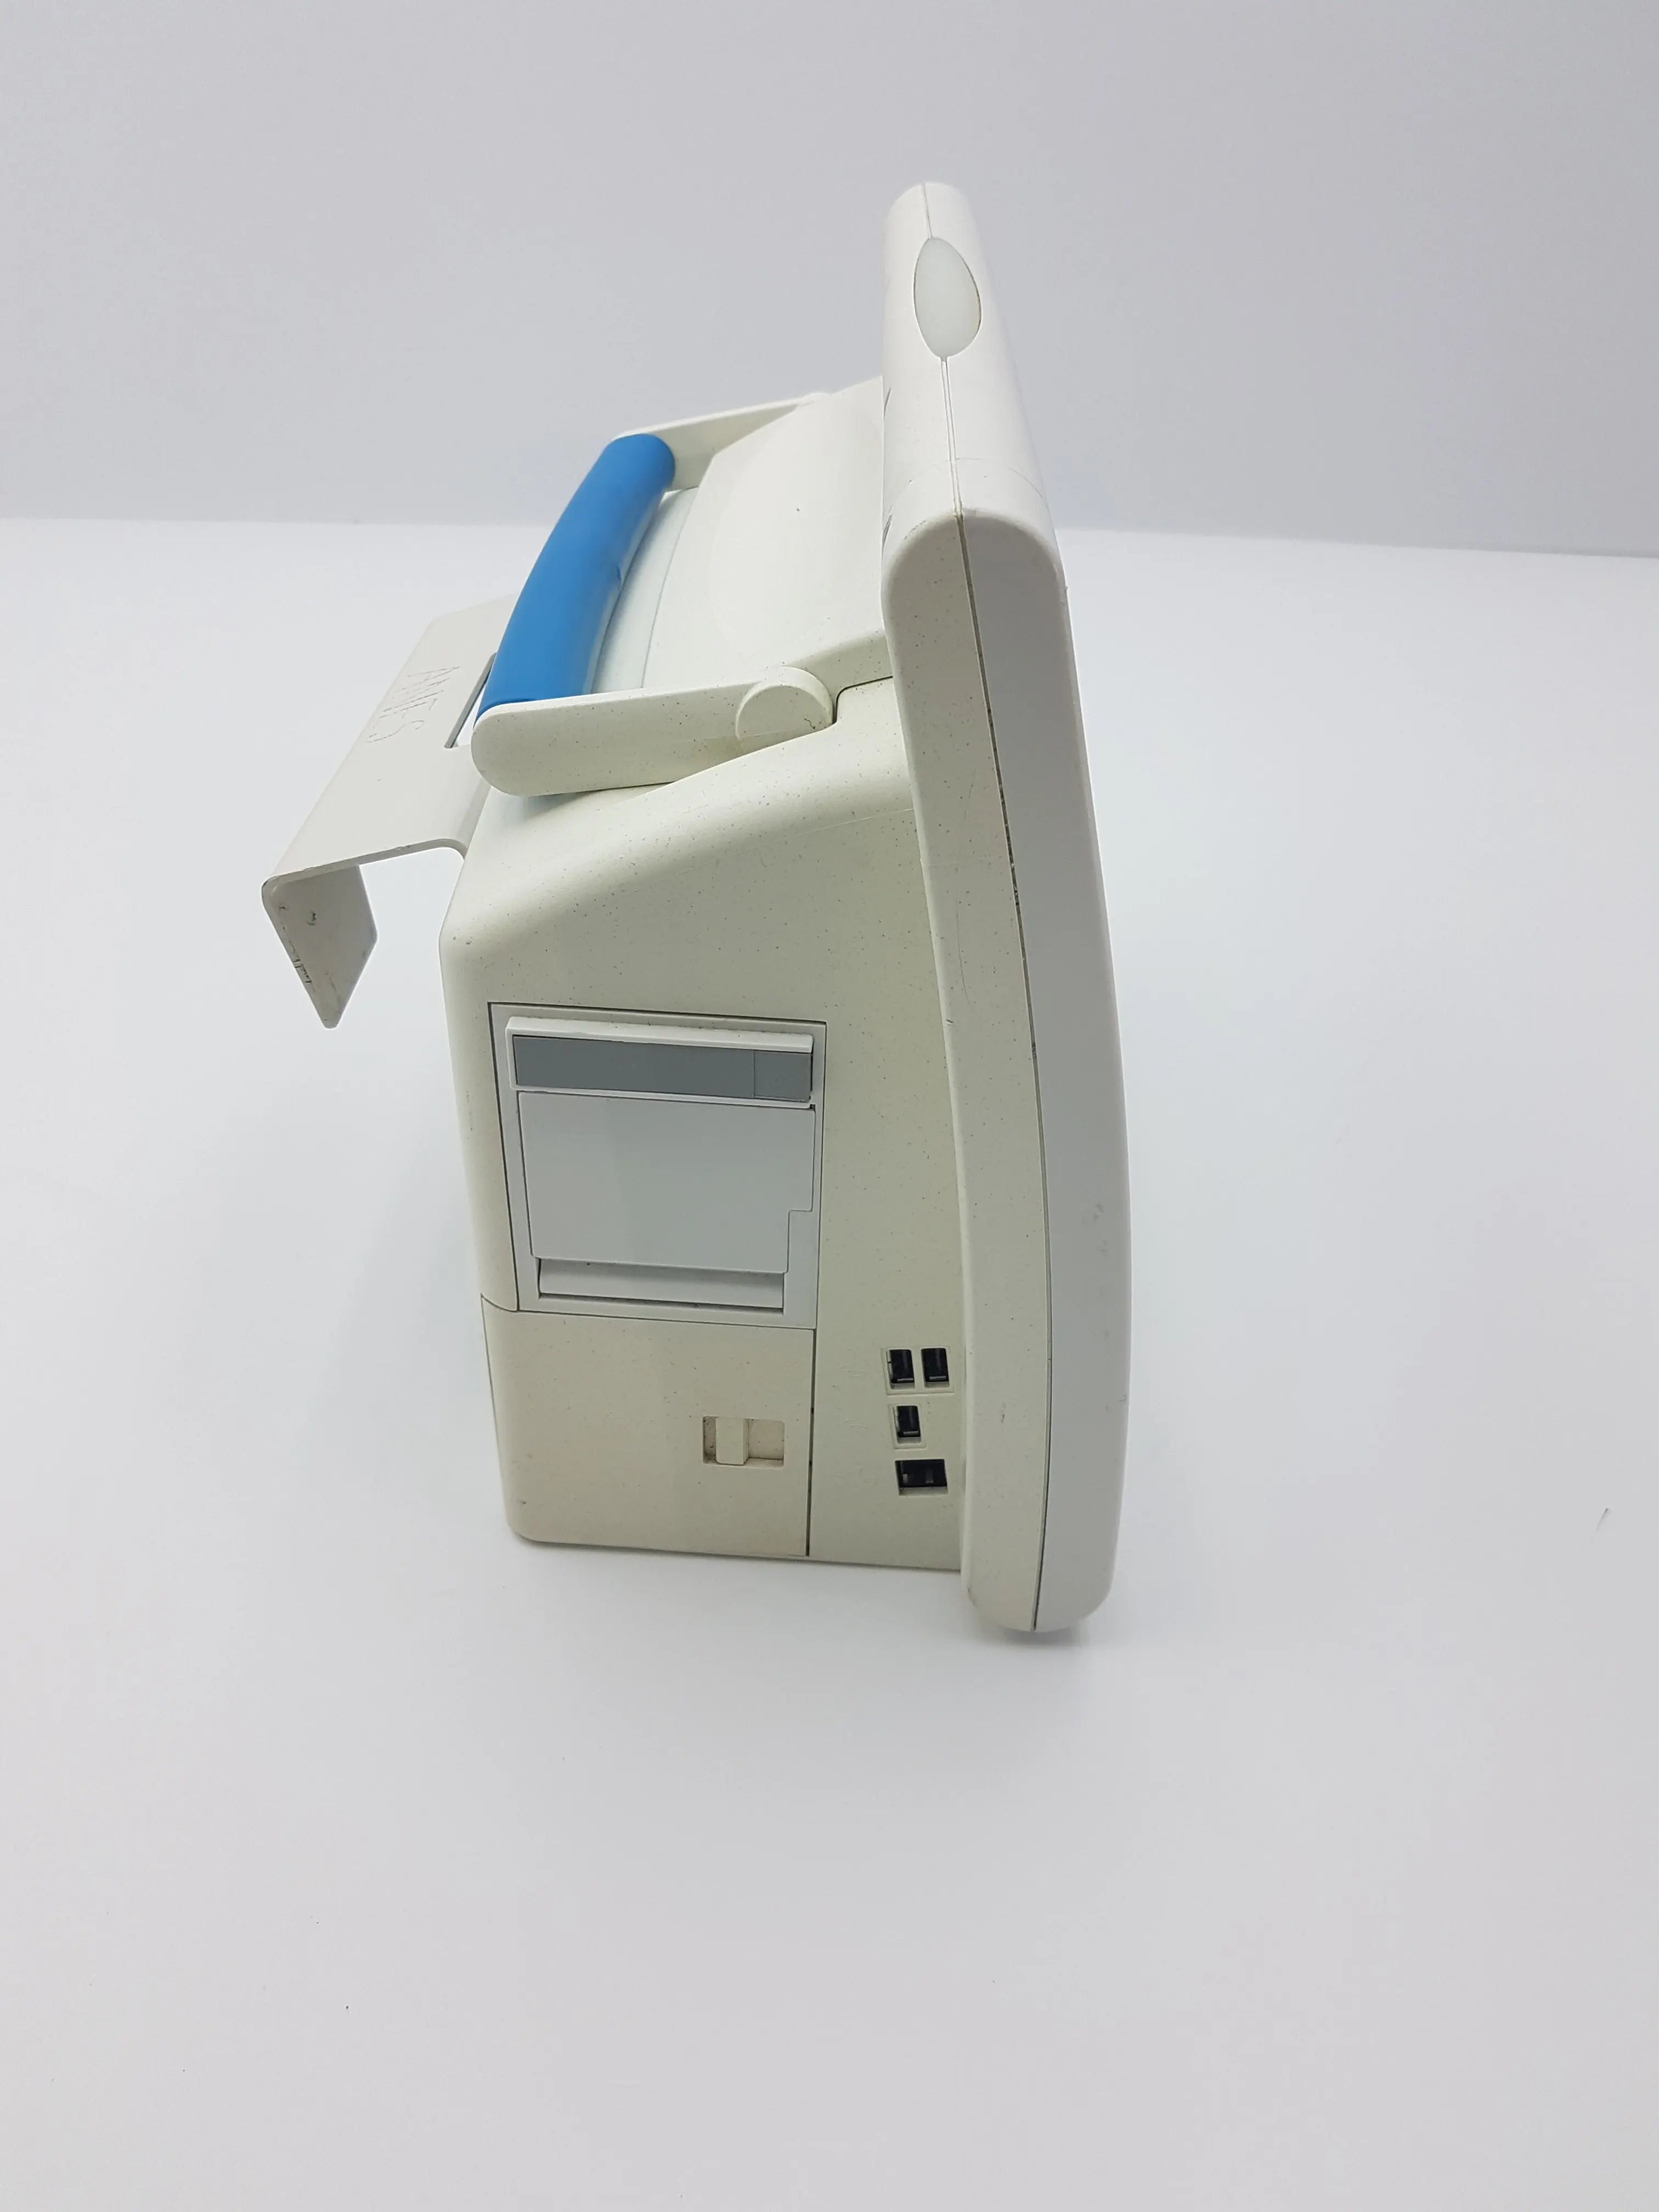 Load image into Gallery viewer, A Biomedical Service Spacelabs Healthcare Ultraview SL 91370 Network Patient Monitor 145.00